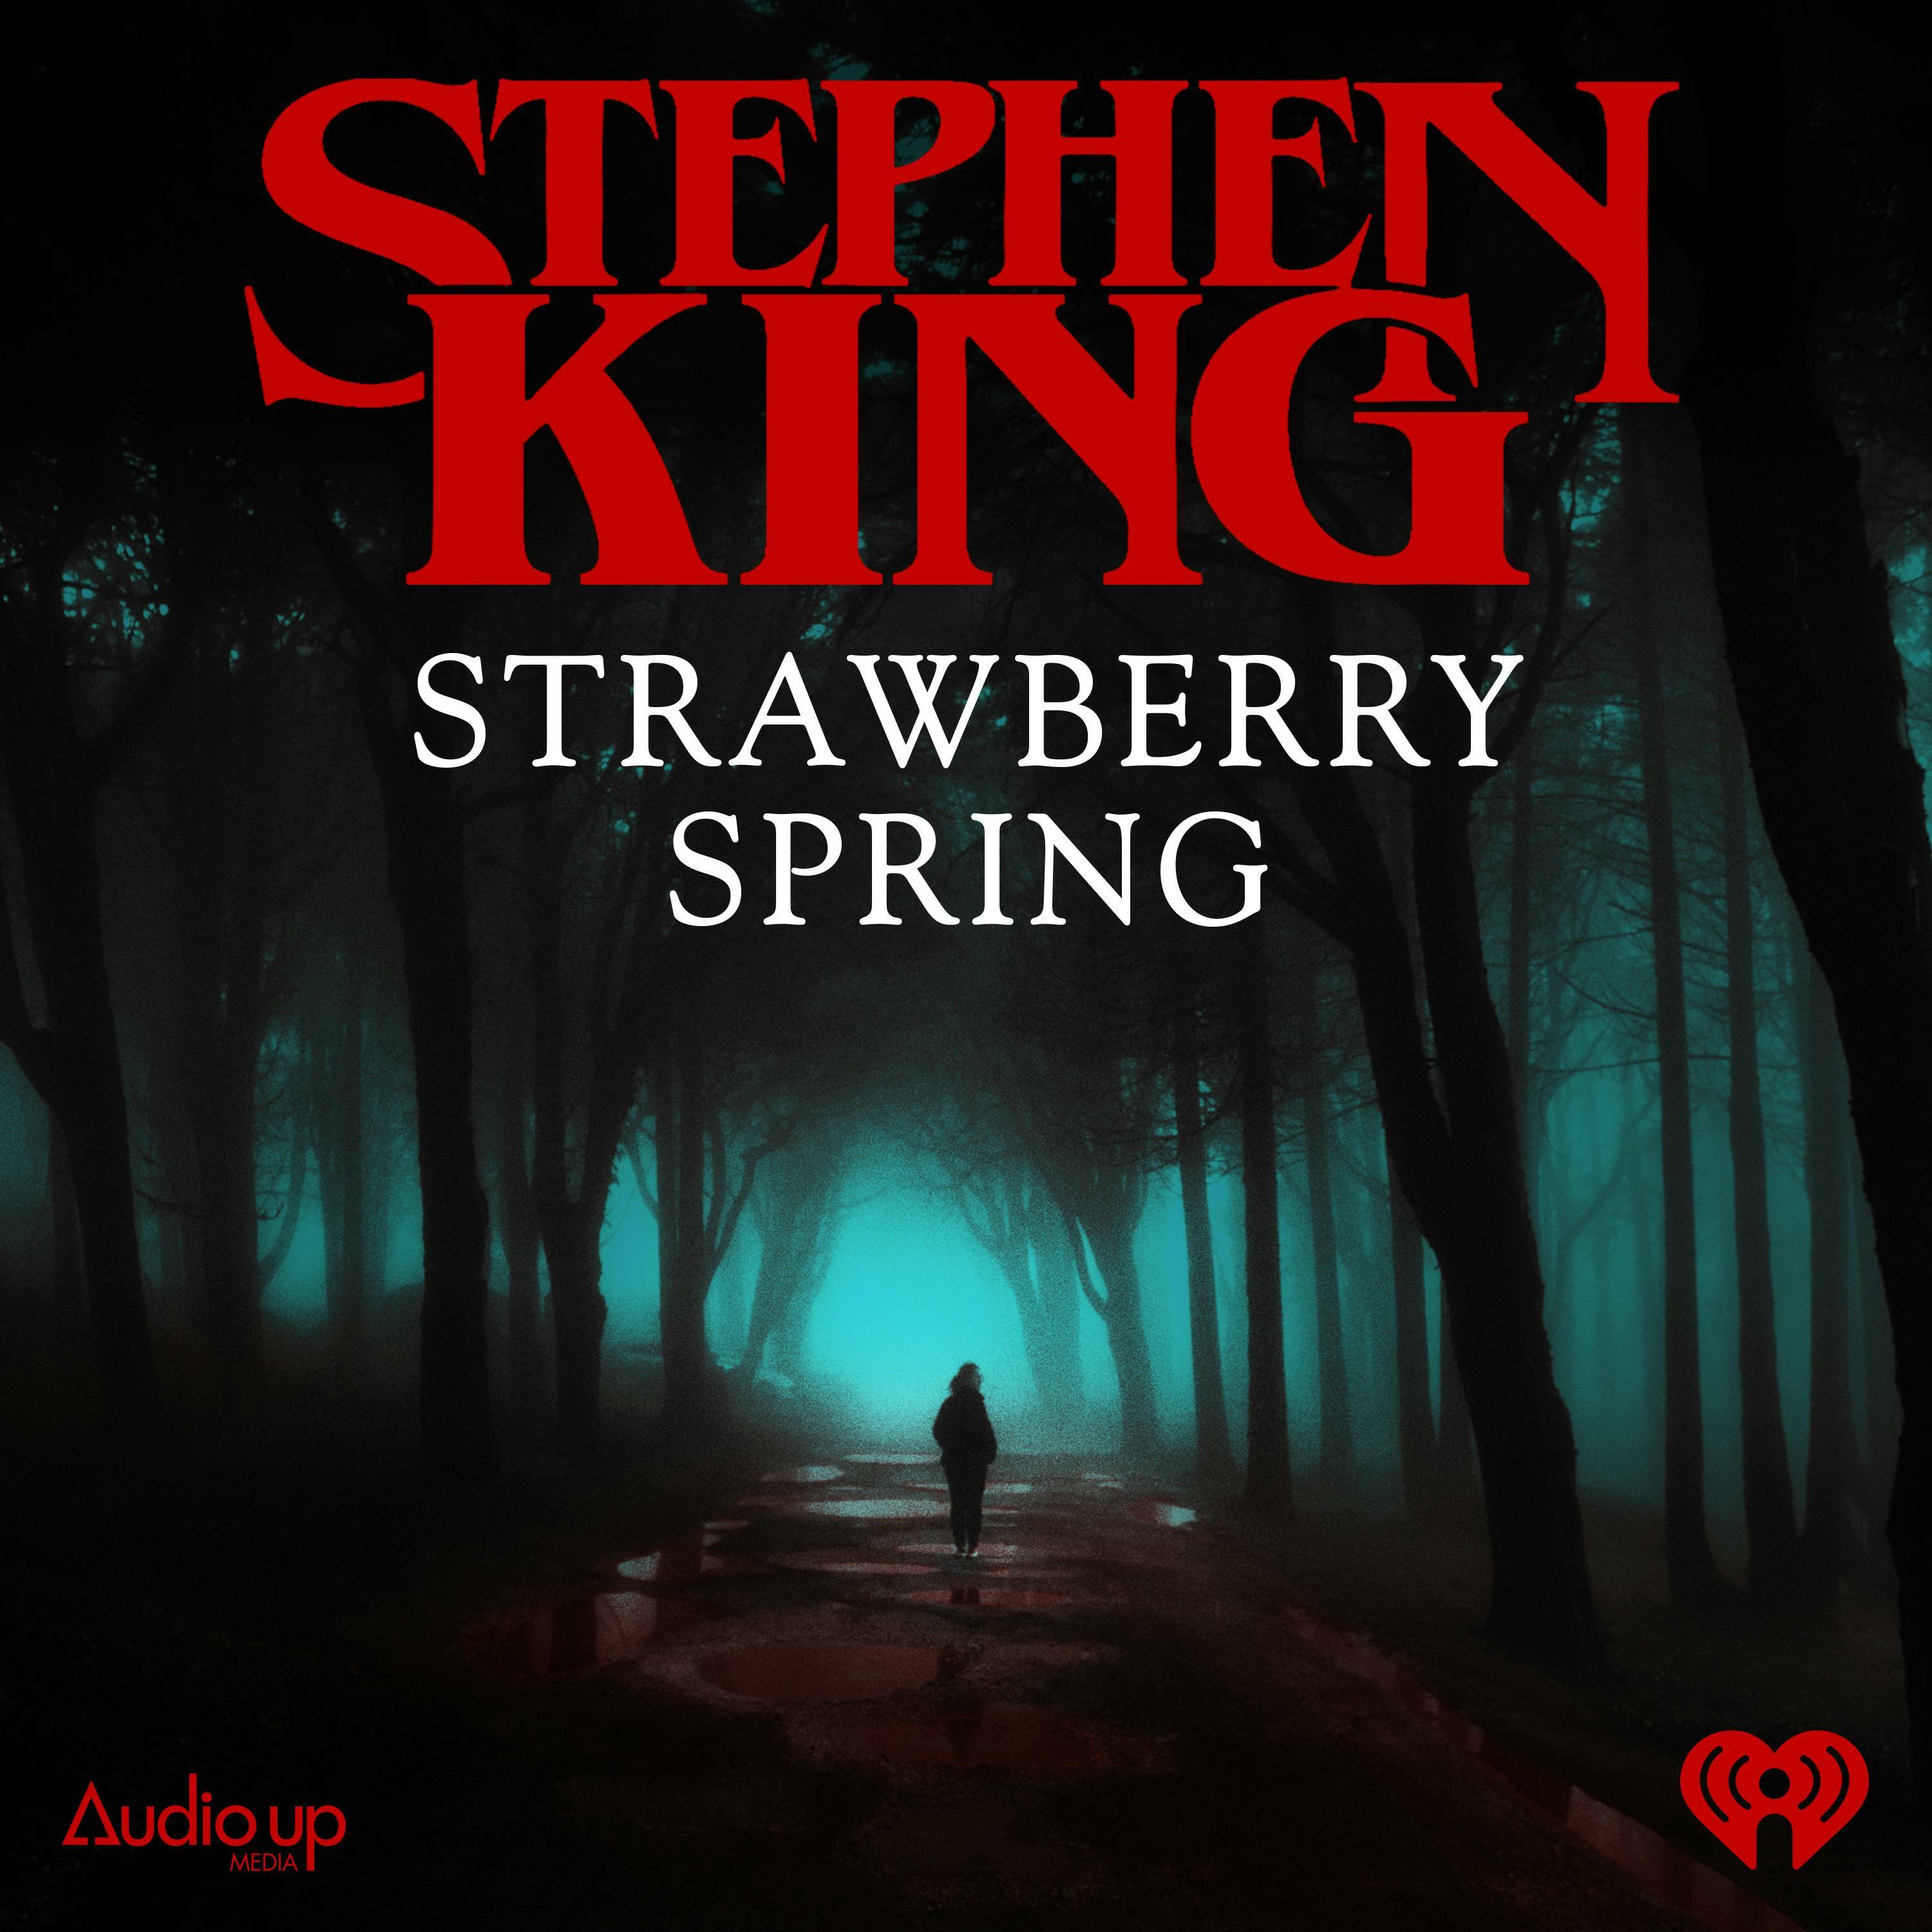 Strawberry Spring | iHeart pocast cover. A darkened forest pathway with a single figure in the middle.